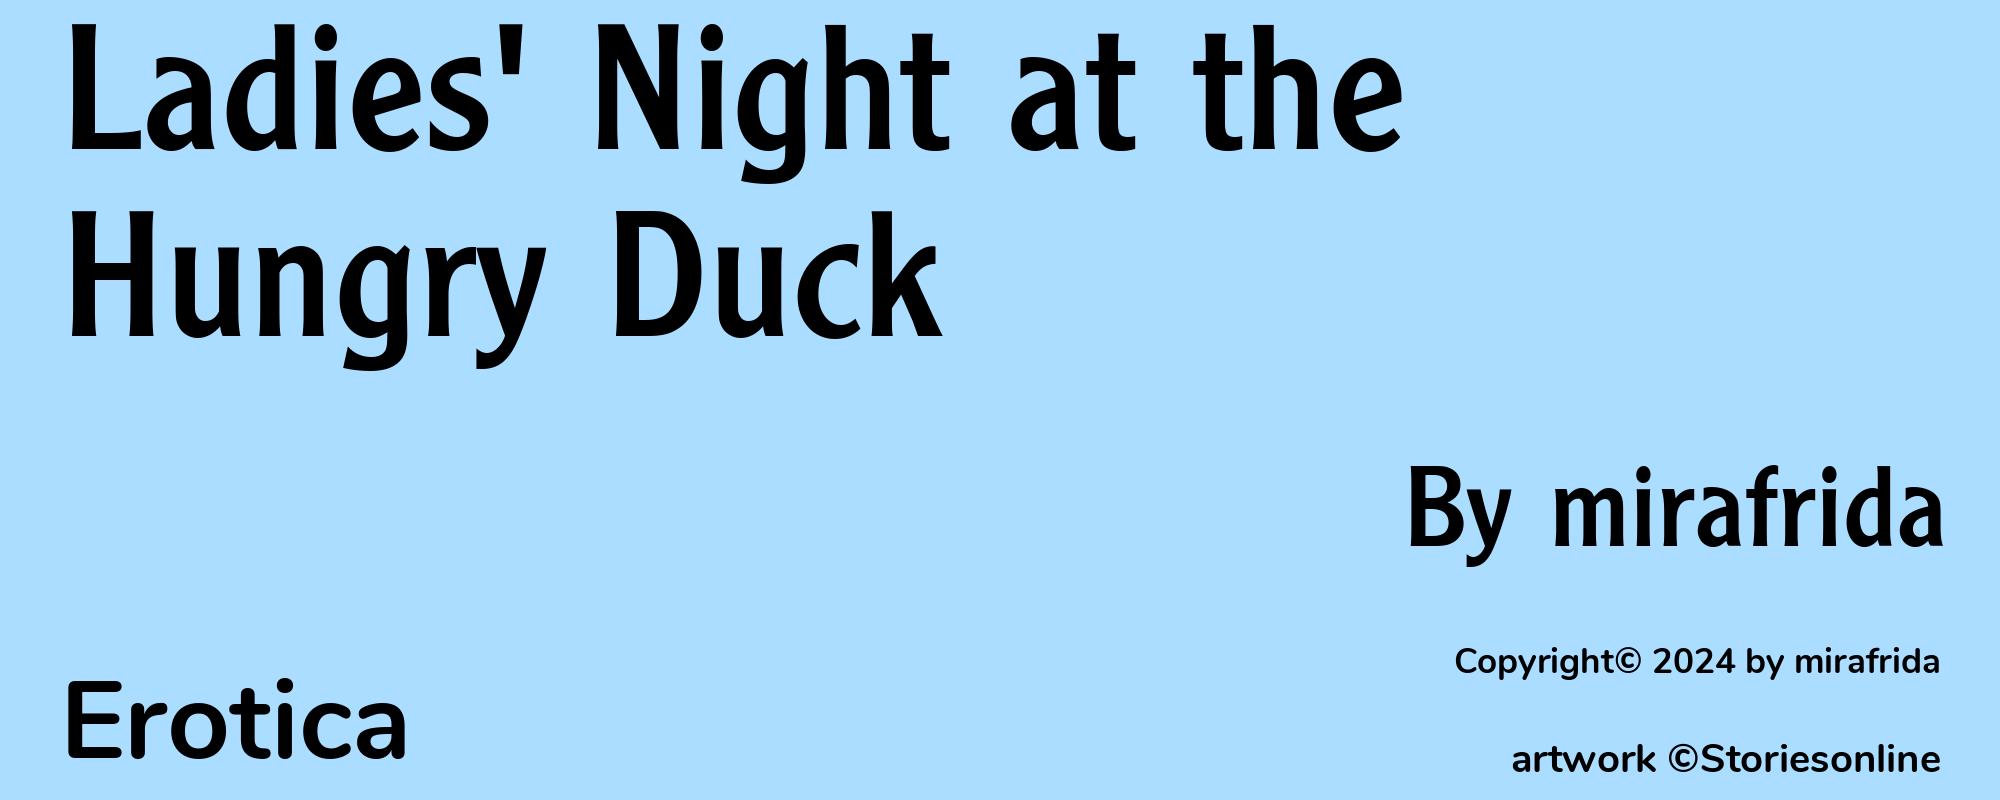 Ladies' Night at the Hungry Duck - Cover